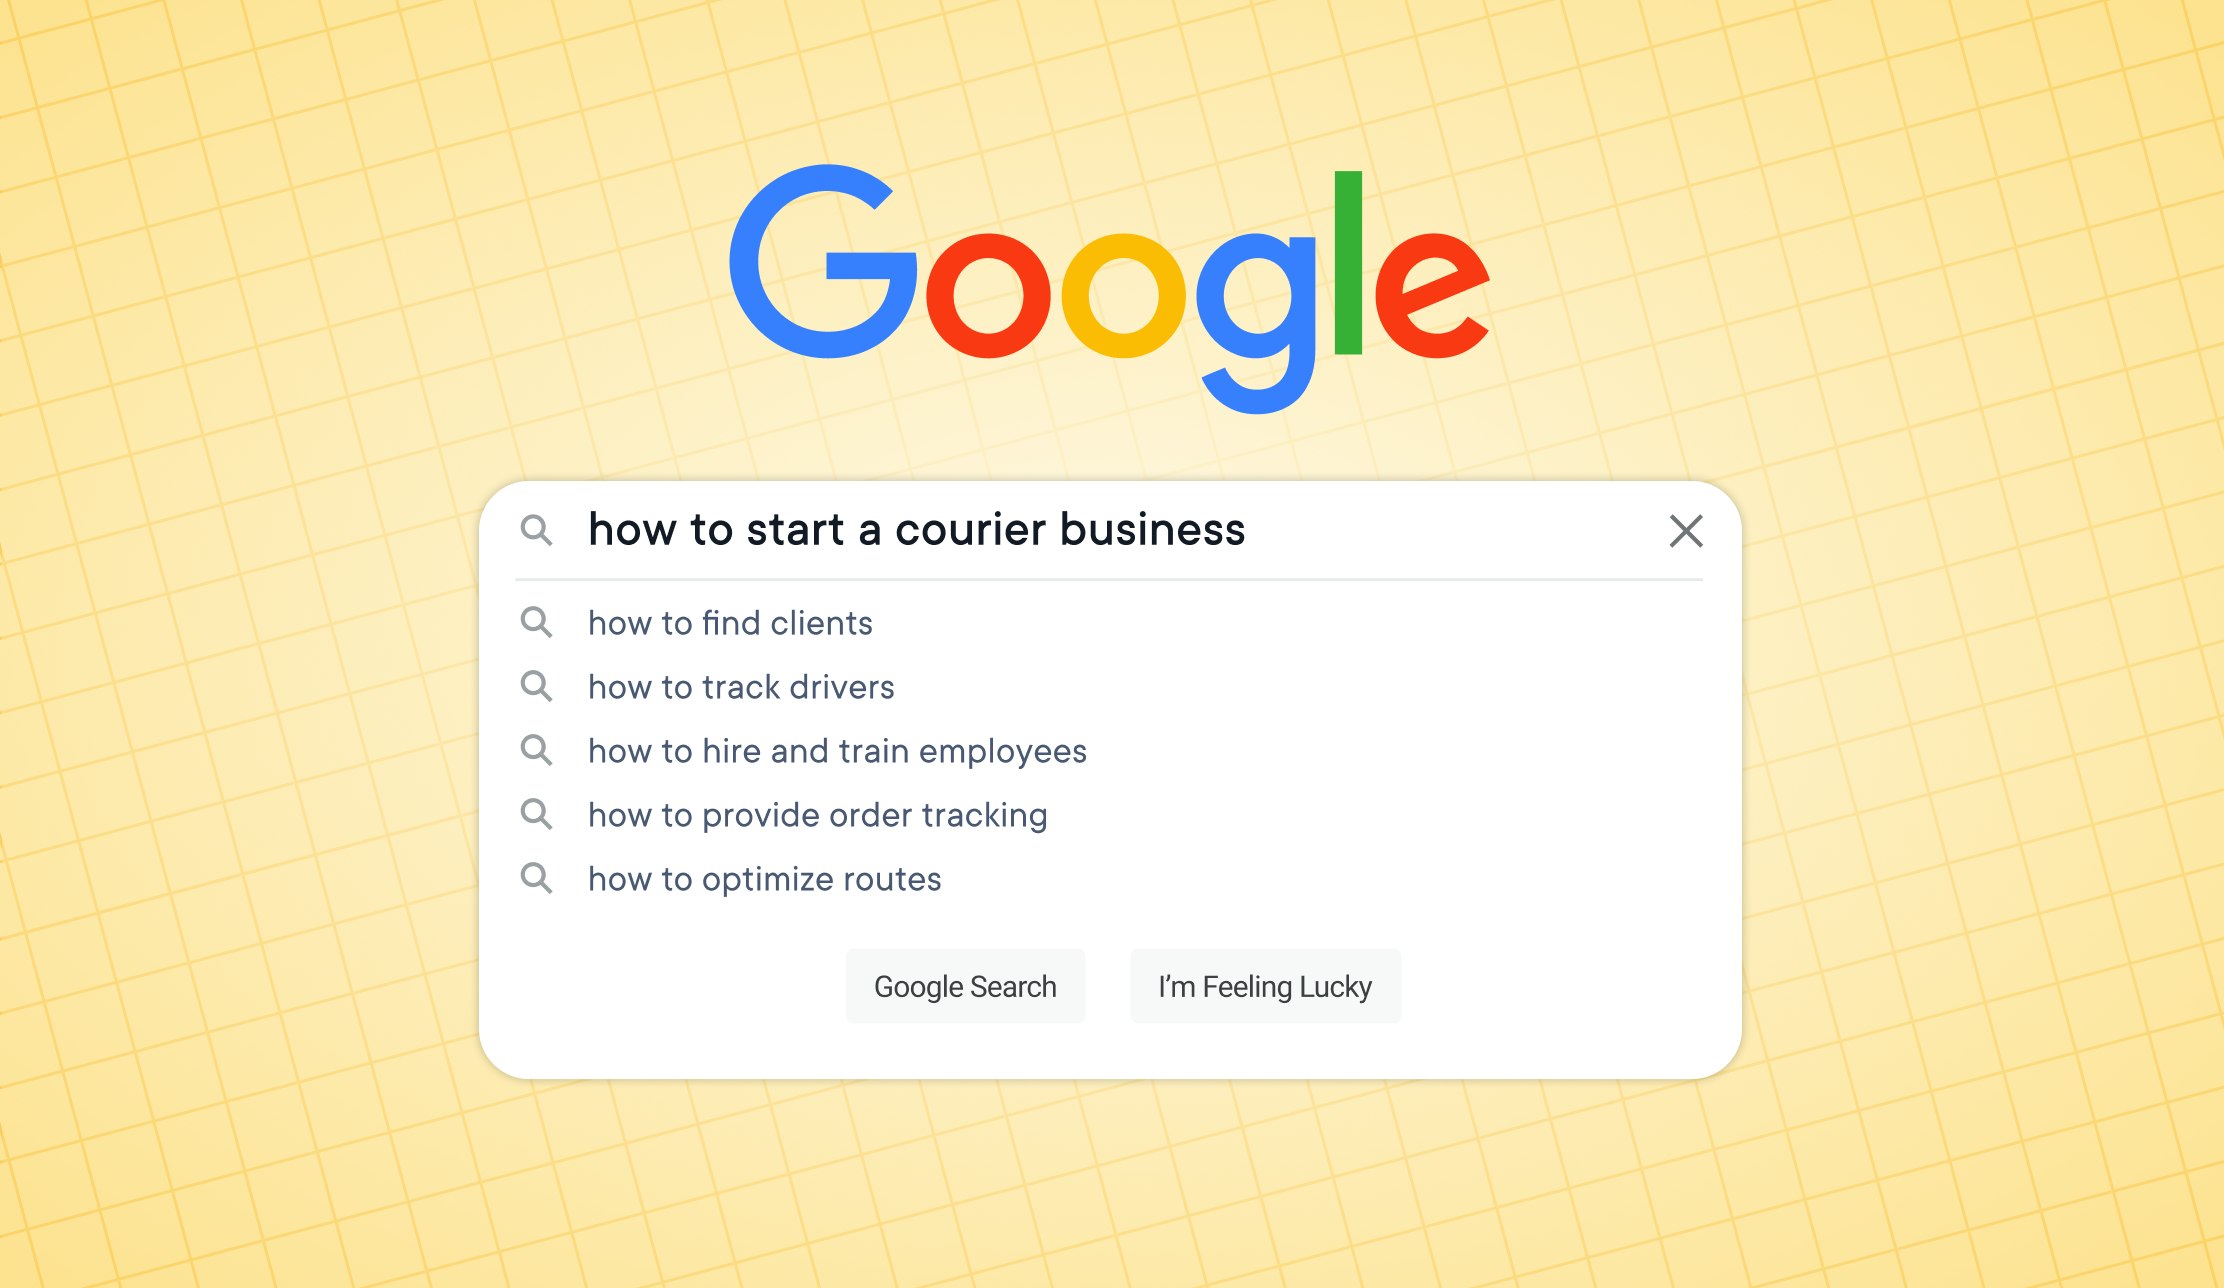 Google search of "How to start a courier business"